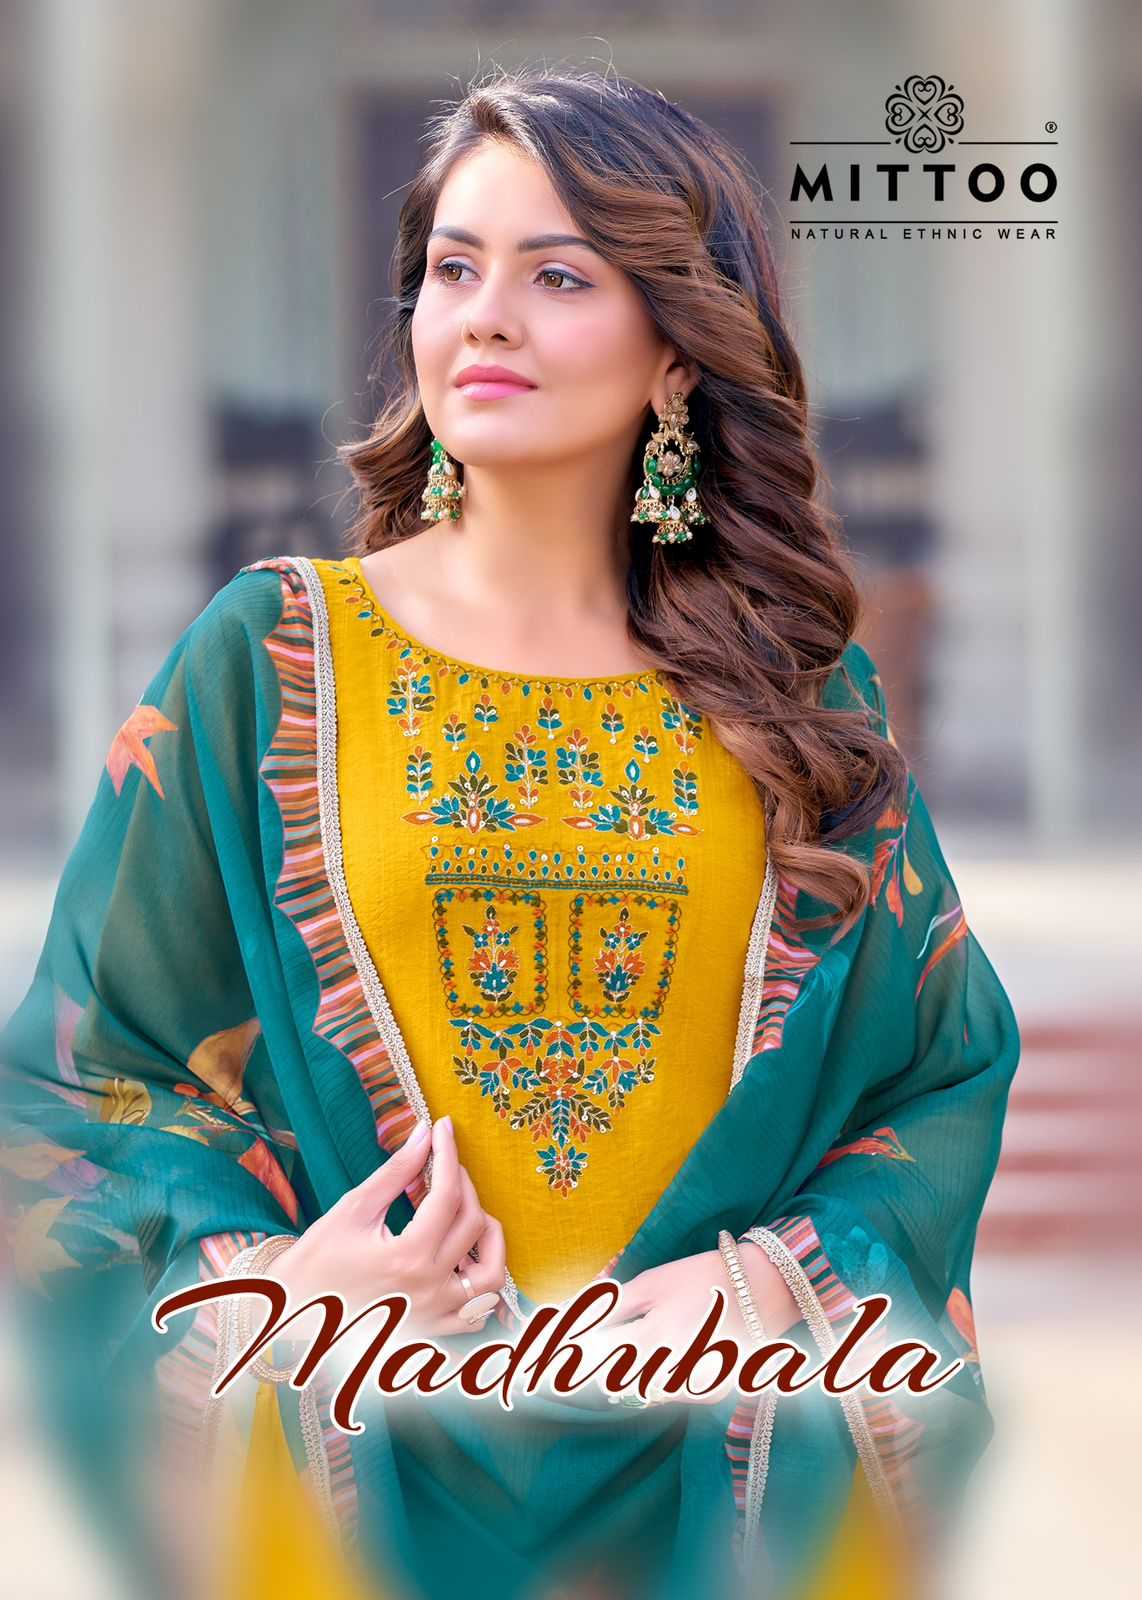 madhubala by mittoo full stitched top bottom and dupatta